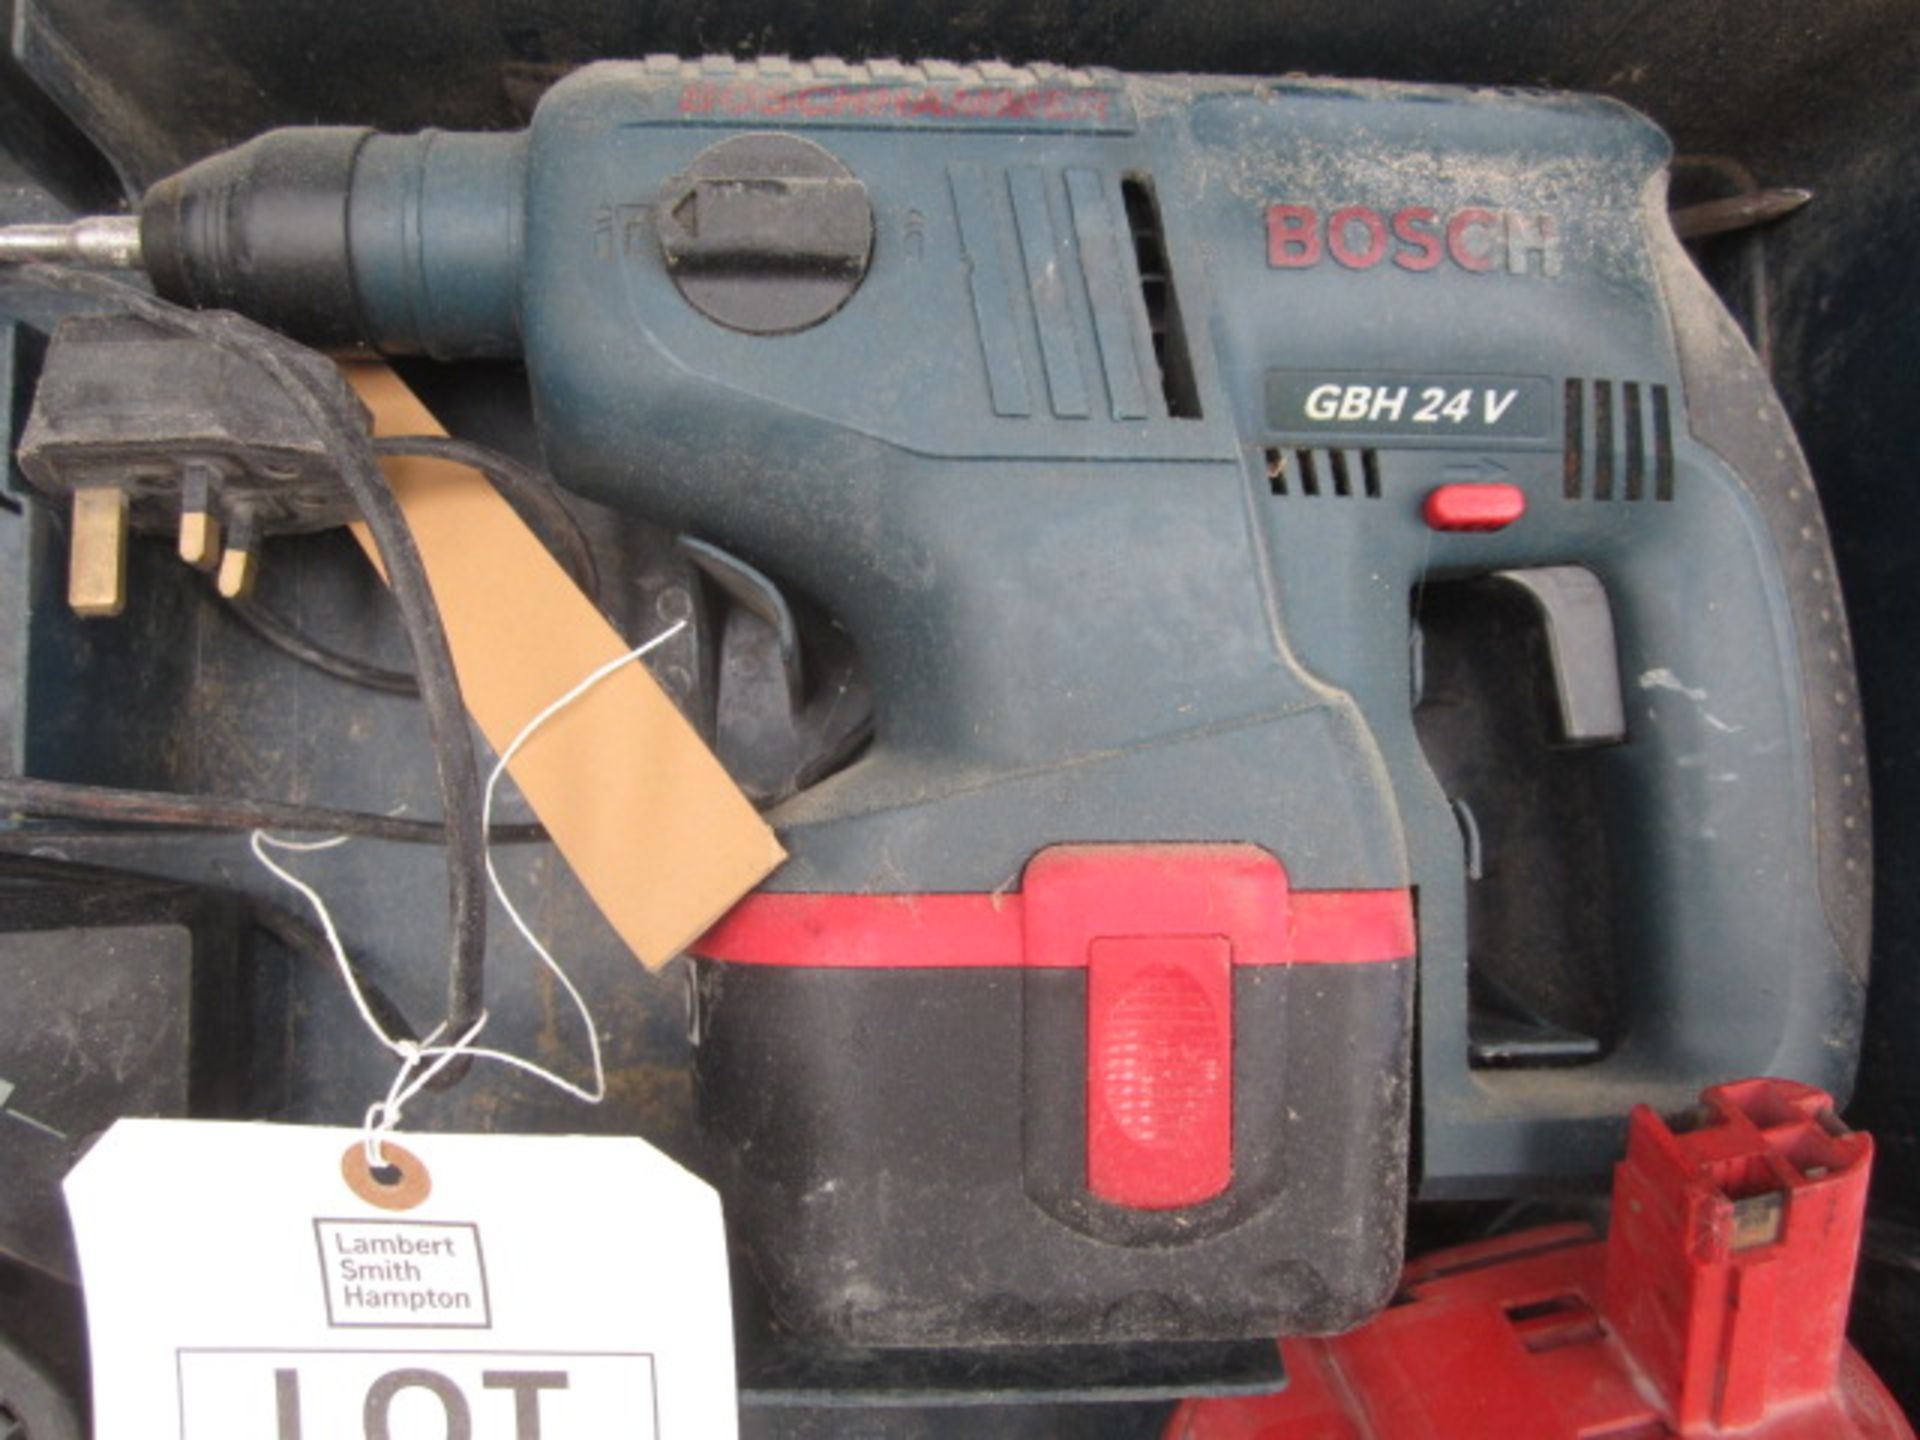 Bosch GBH 24v cordless hammer drill, charger & carry case, serial no. 4840000955 (2004) - Image 2 of 2